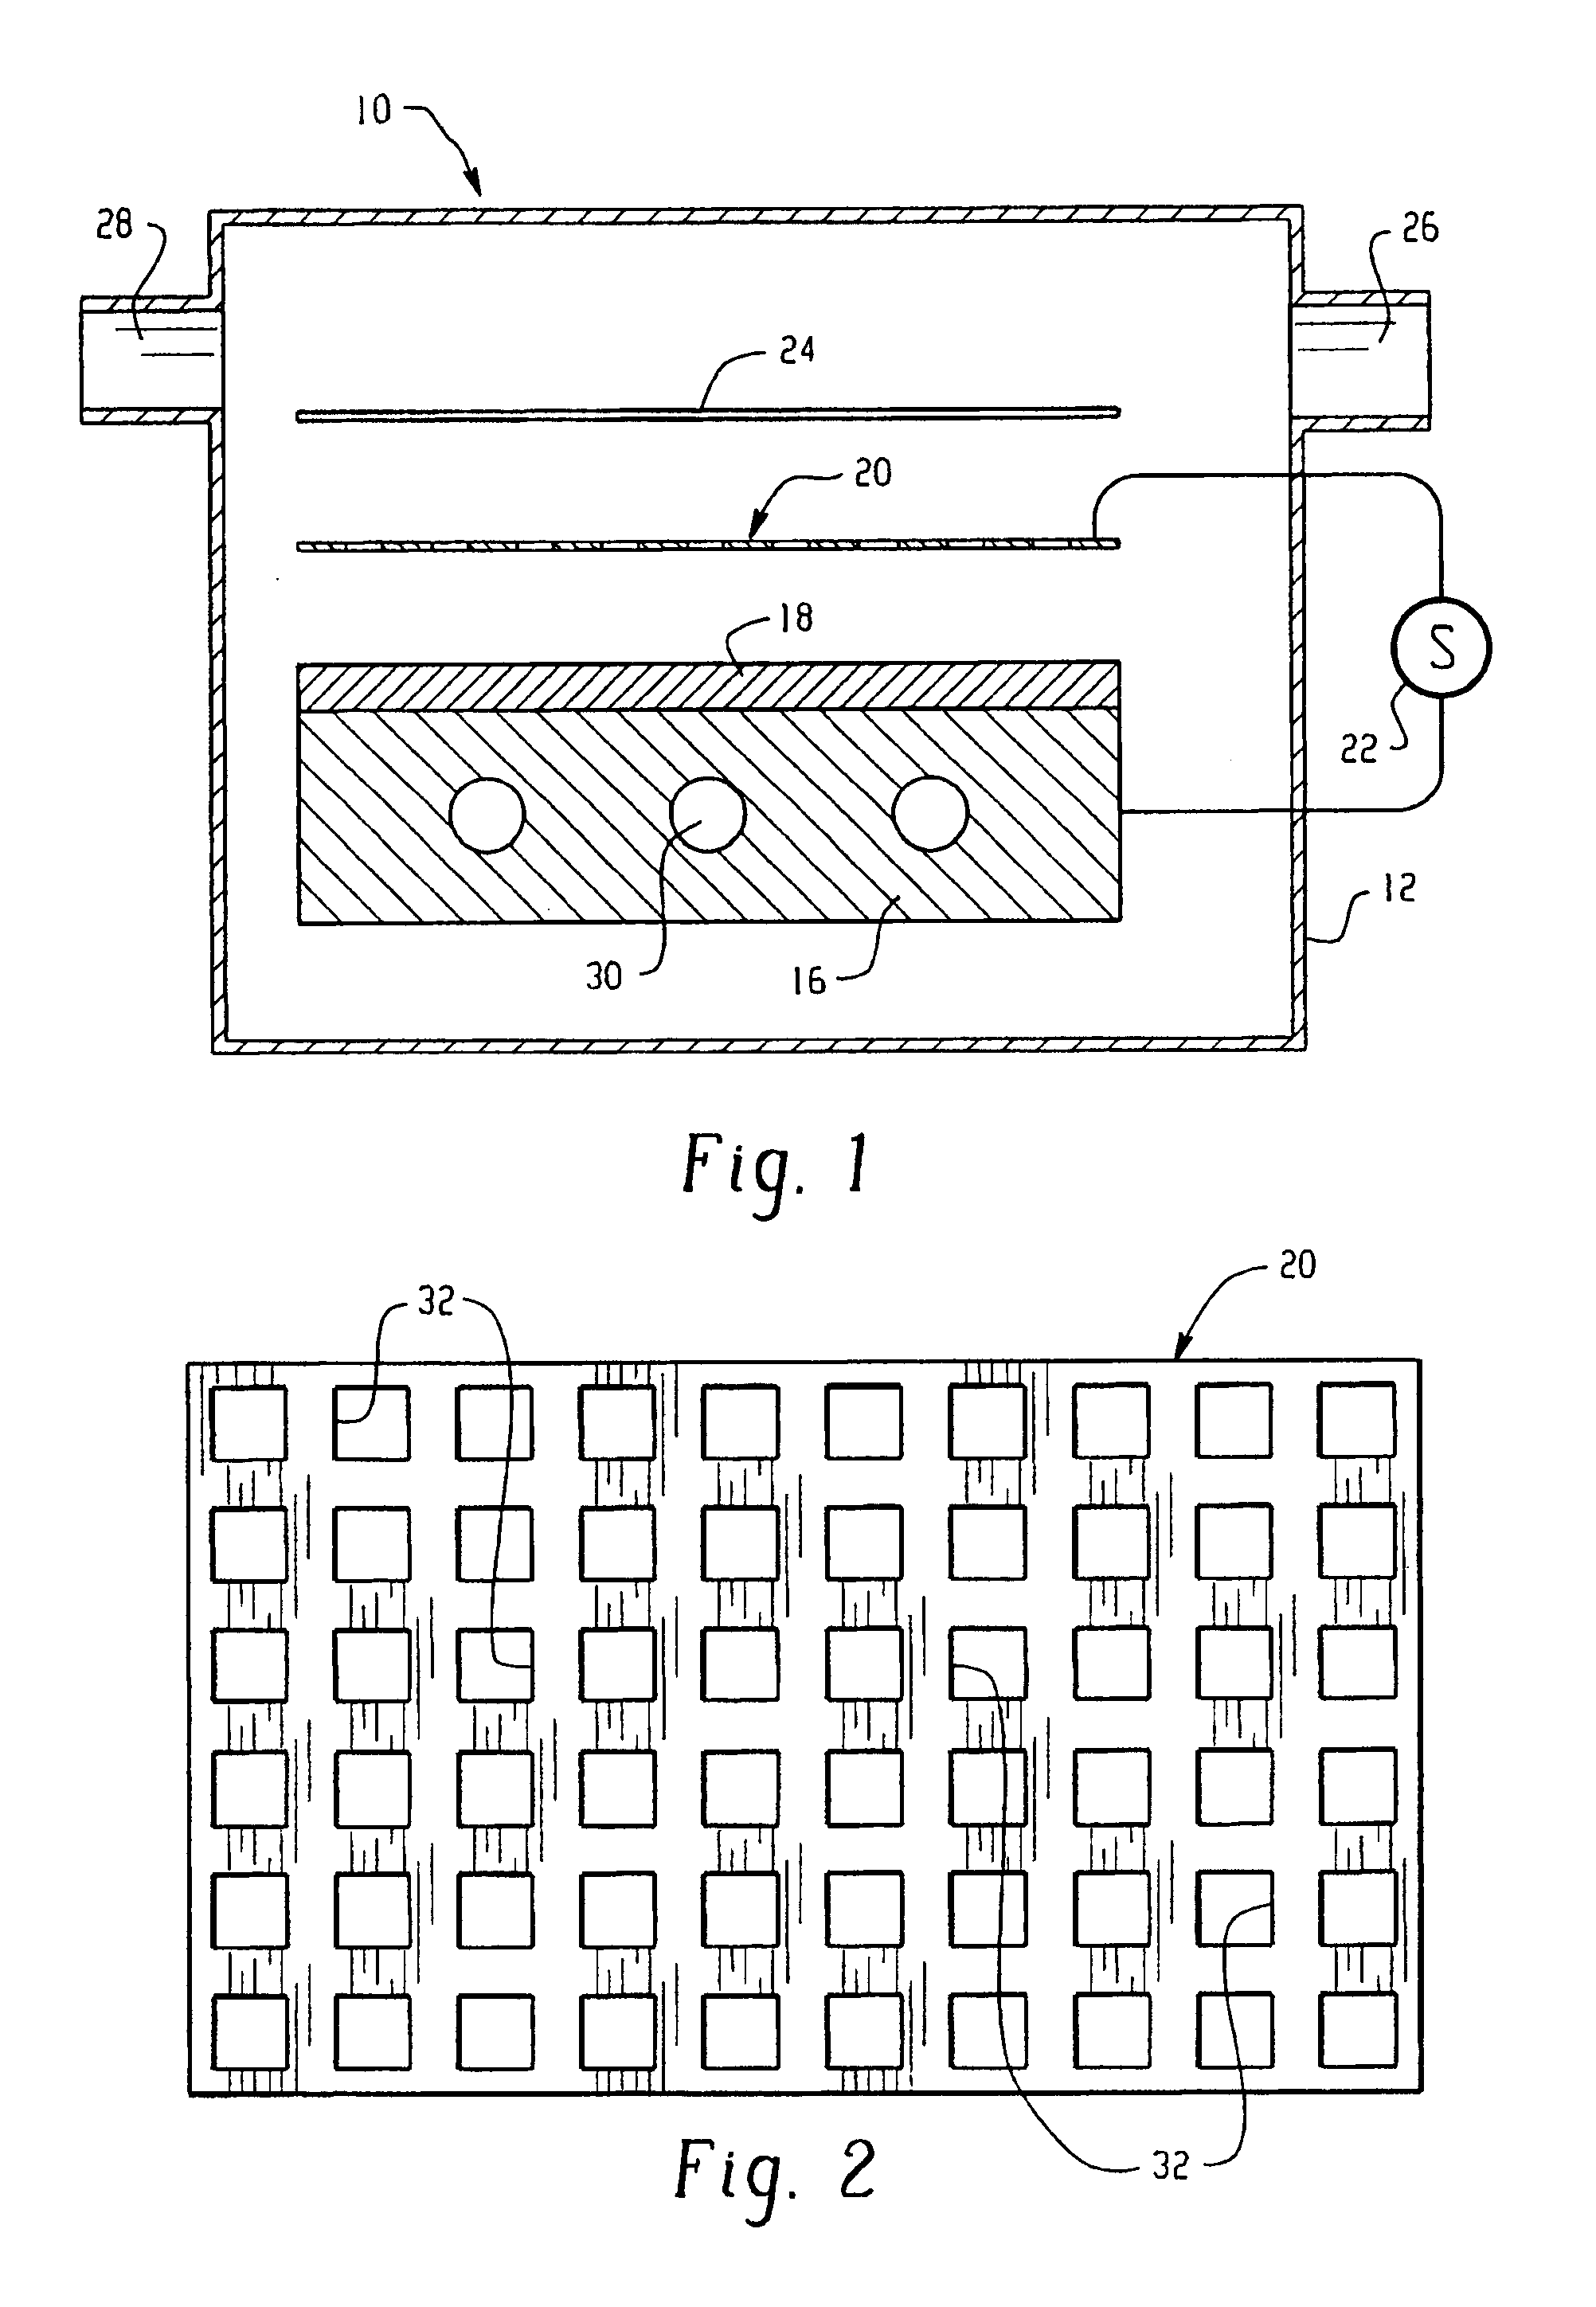 Dielectric barrier discharge apparatus and process for treating a substrate